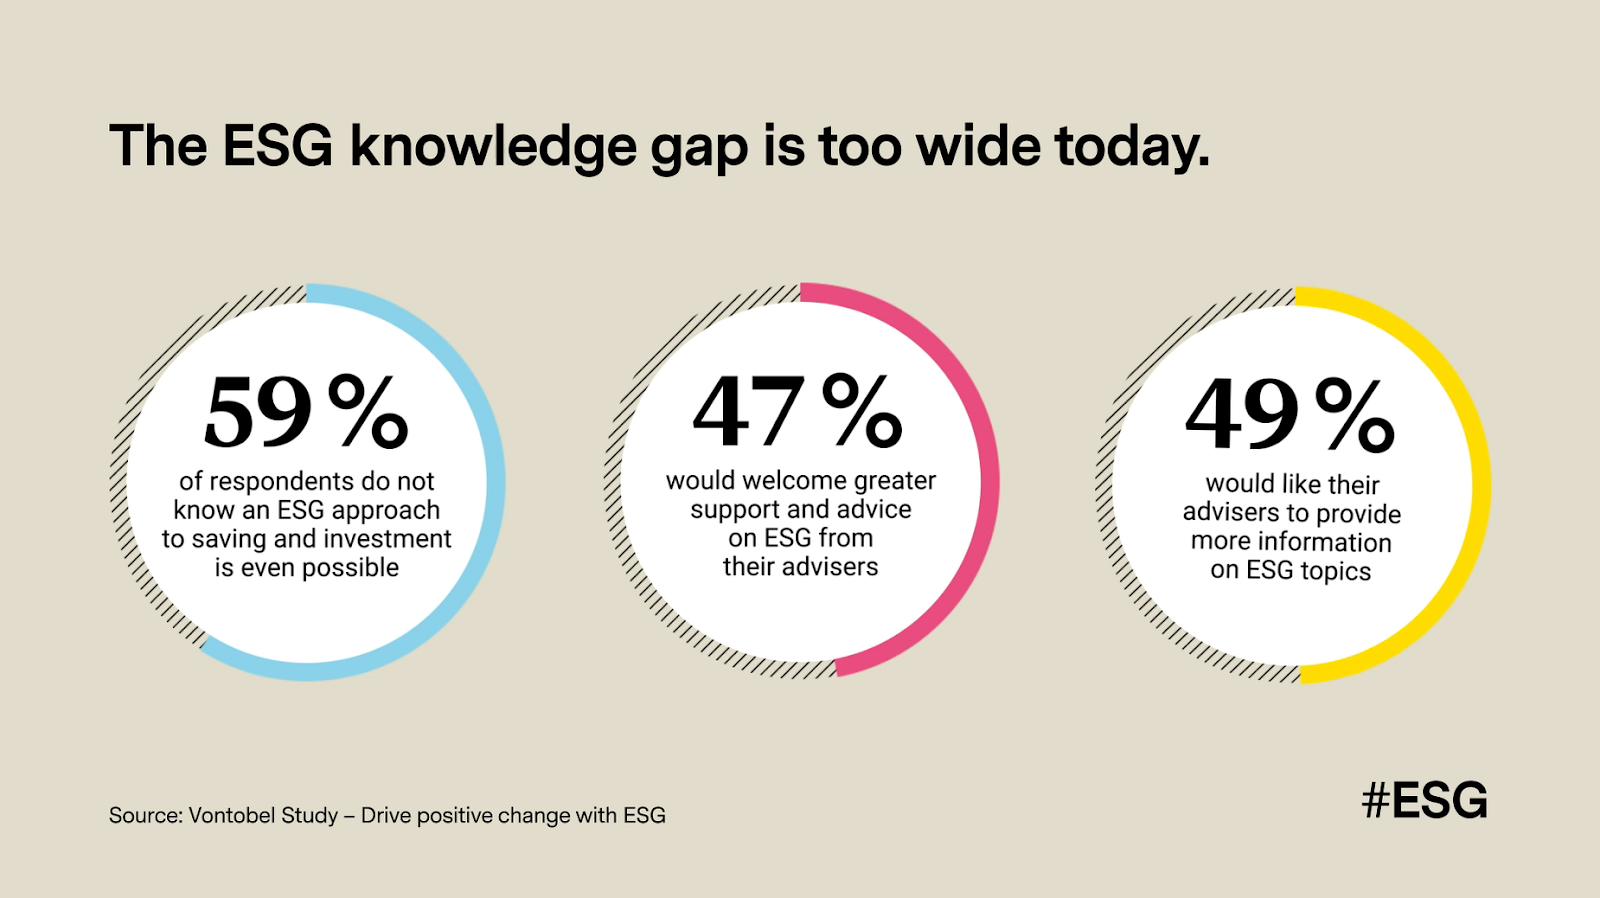 why the knowledge gap is too wide today